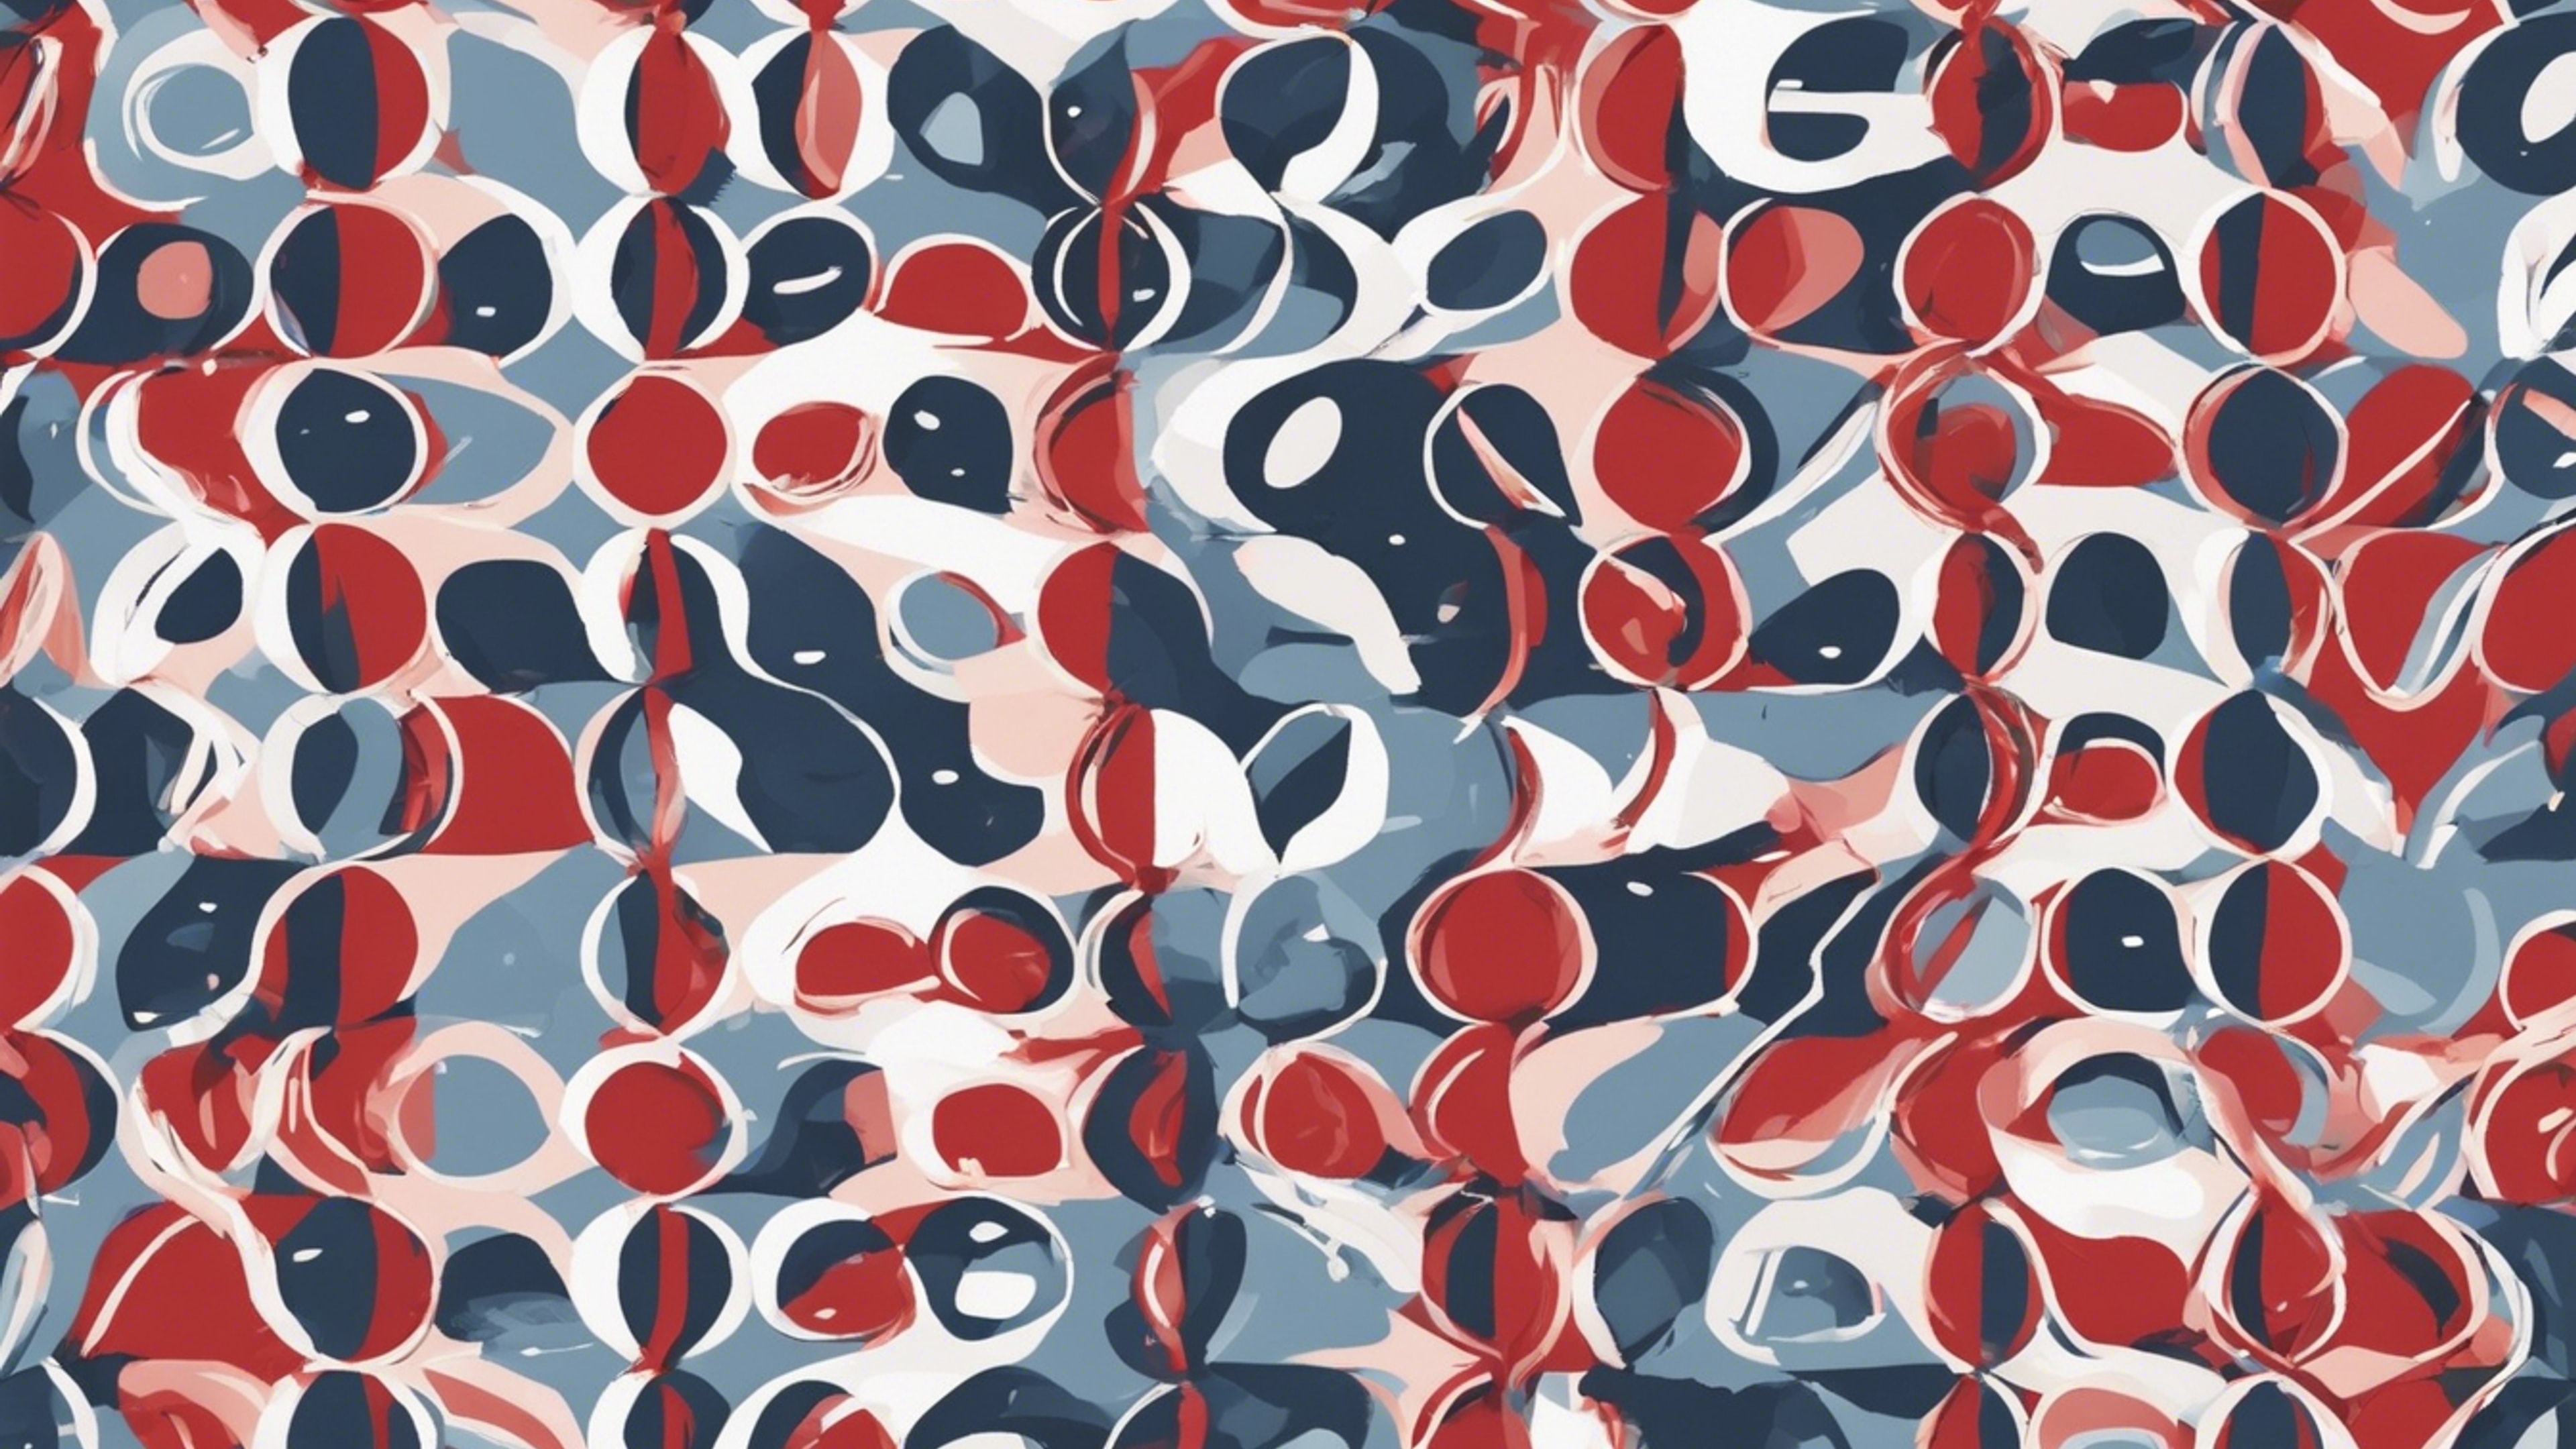 Simple and clean Scandinavian red and blue pattern. Шпалери[367ad8fa403444a2bdd2]